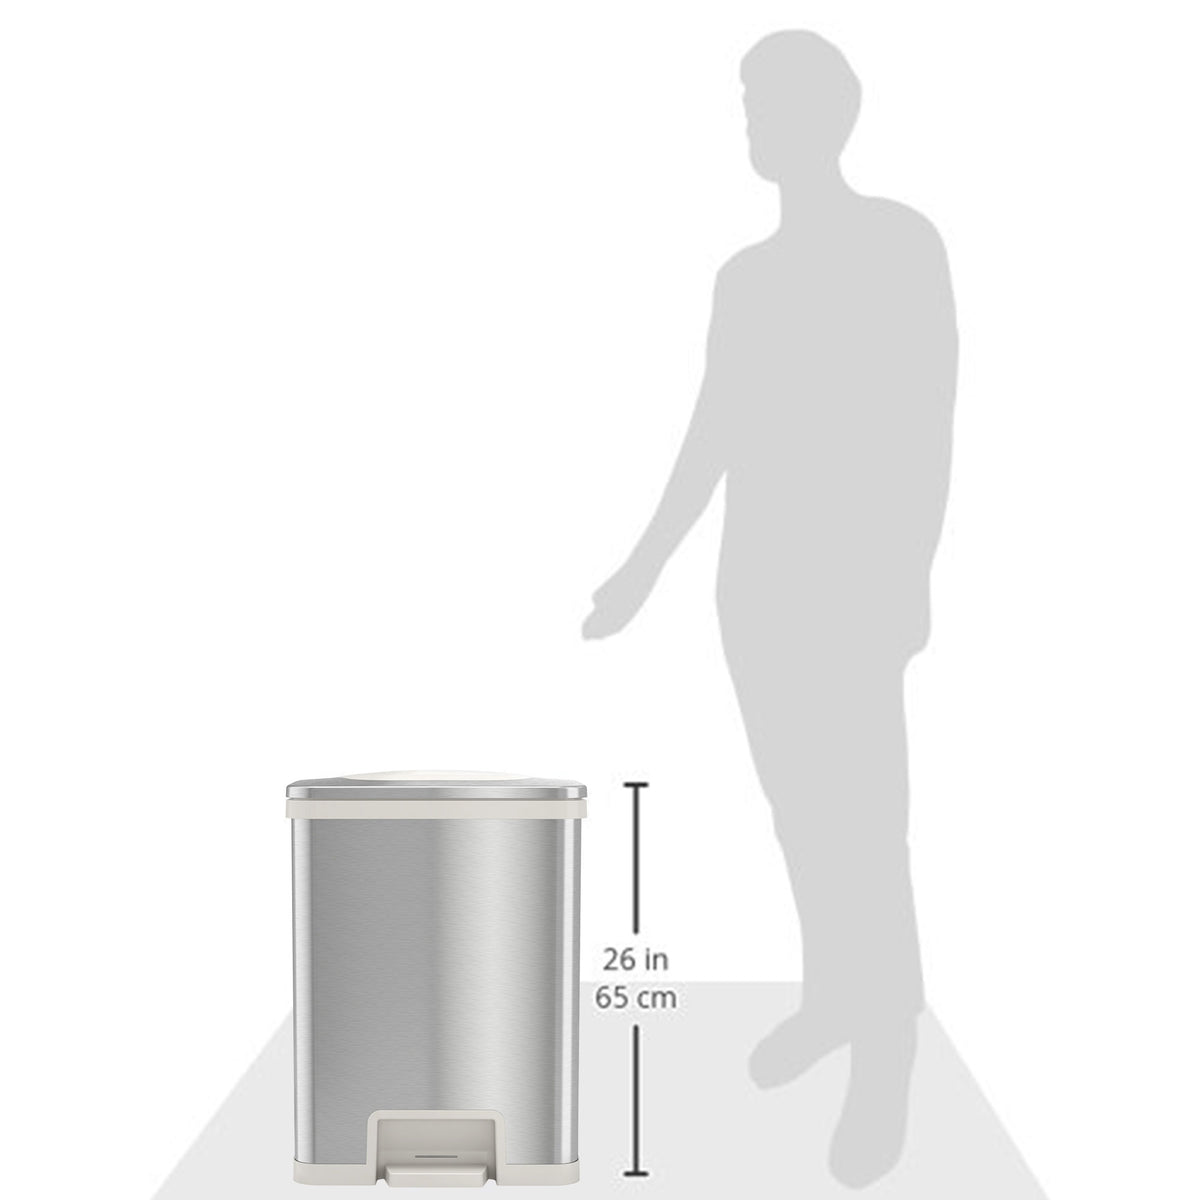 13 Gallon AutoStep Stainless Steel Pedal Sensor Trash Can (White Trim) dimensions